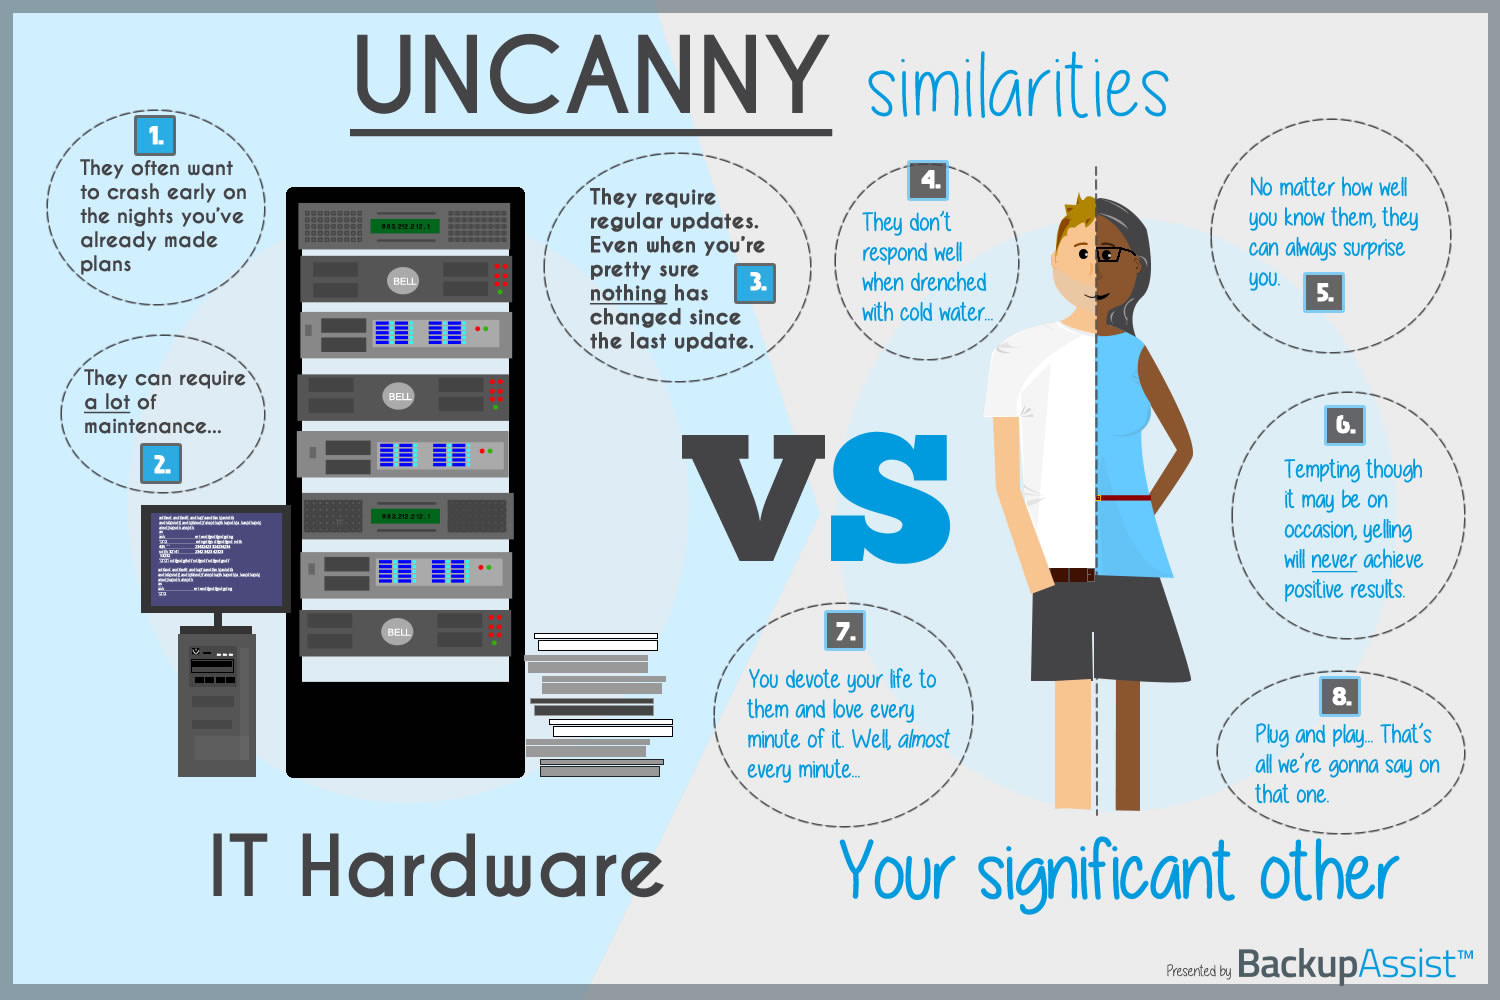 Uncanny similarities - IT hardware and your significant other